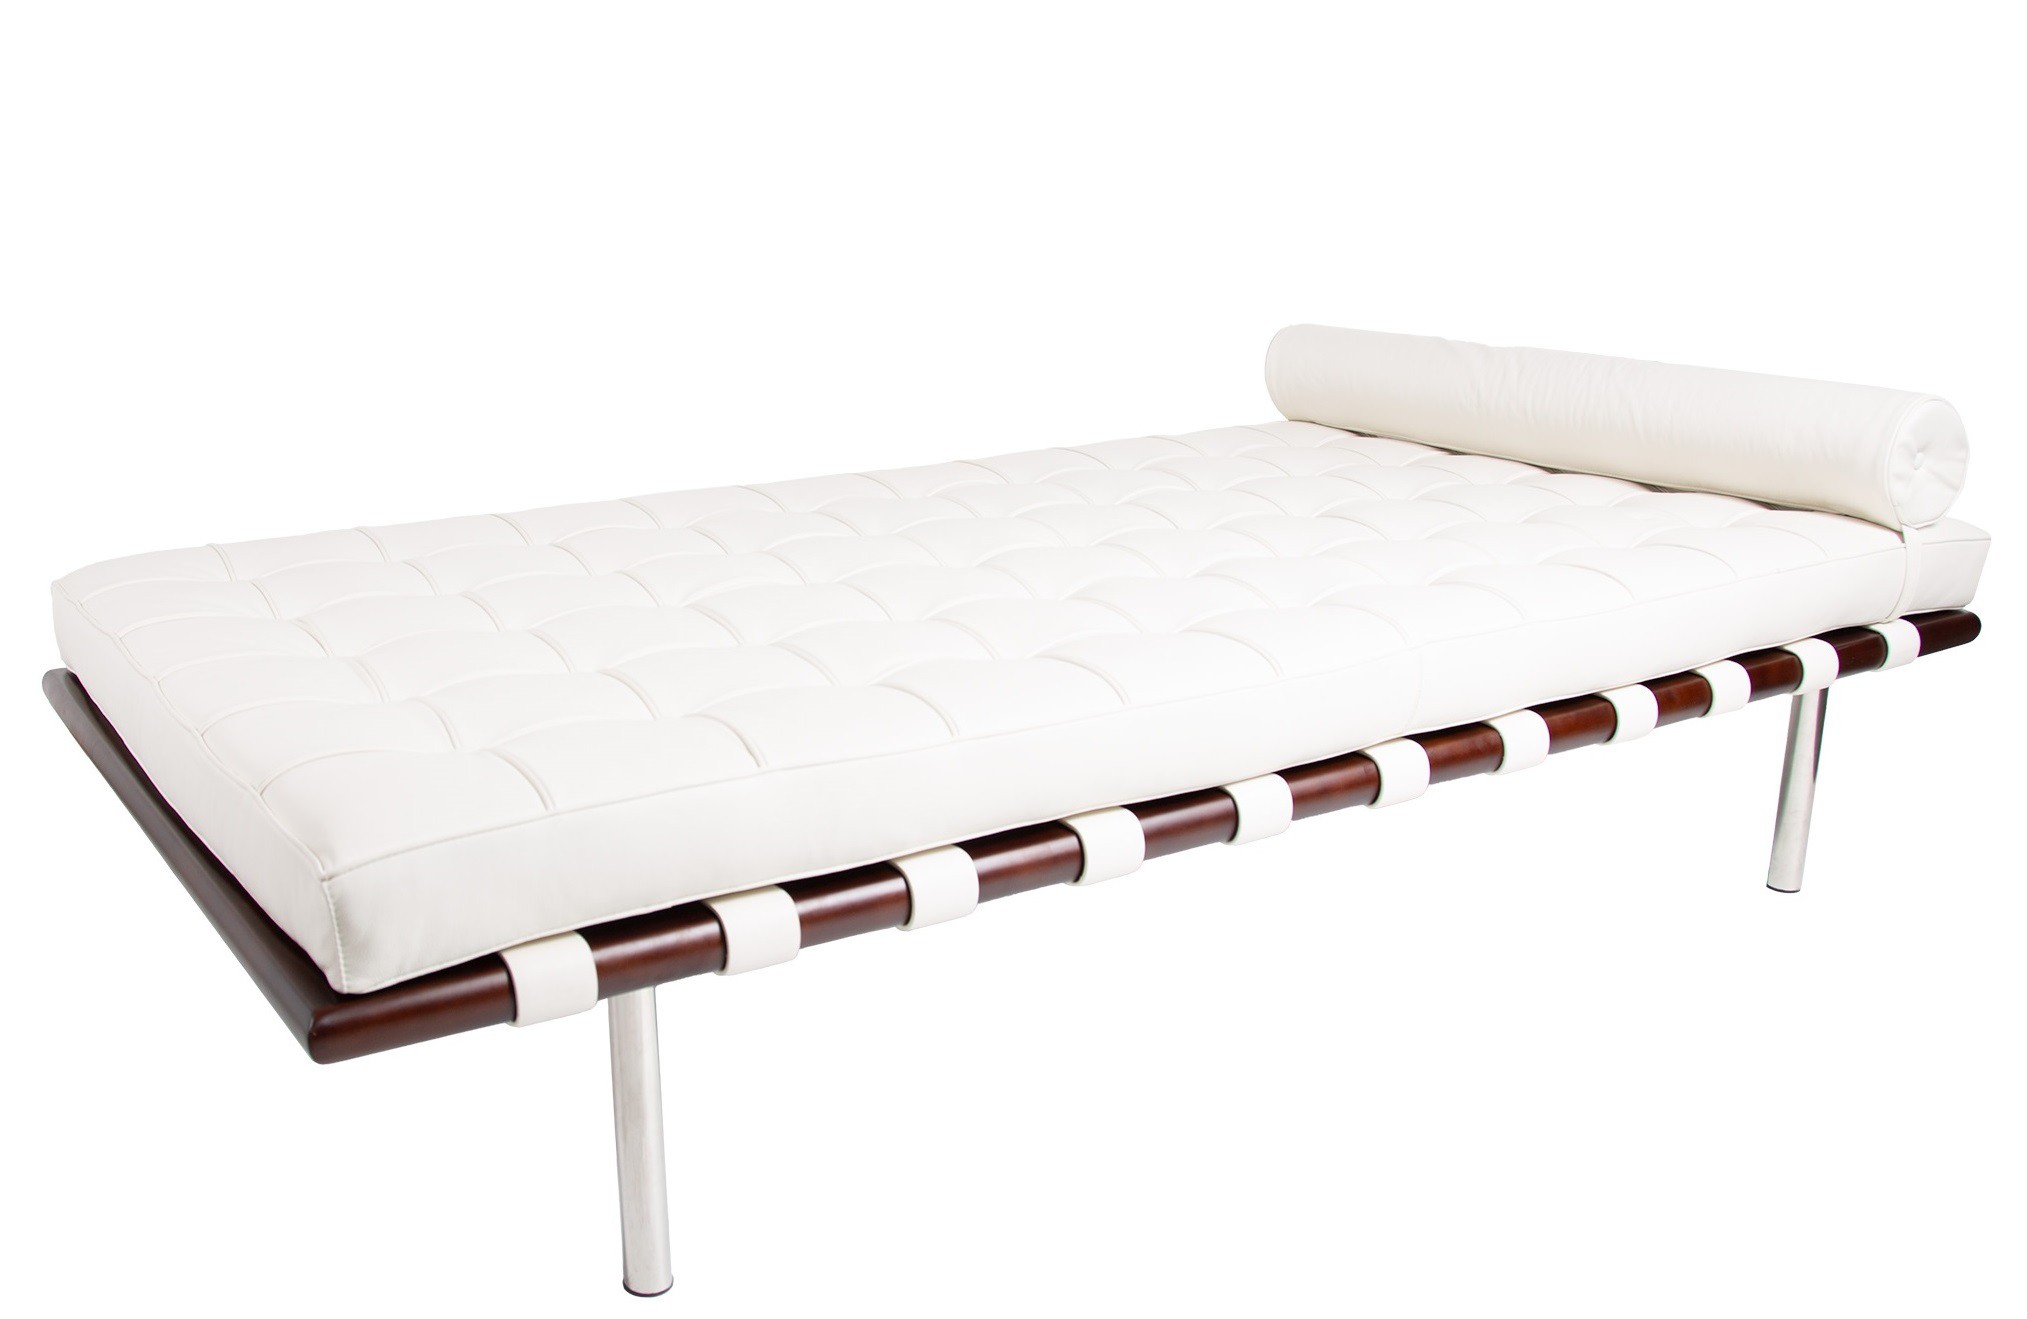 Rohe Barcelona Pavillion Daybed, White Leather Trundle Bed